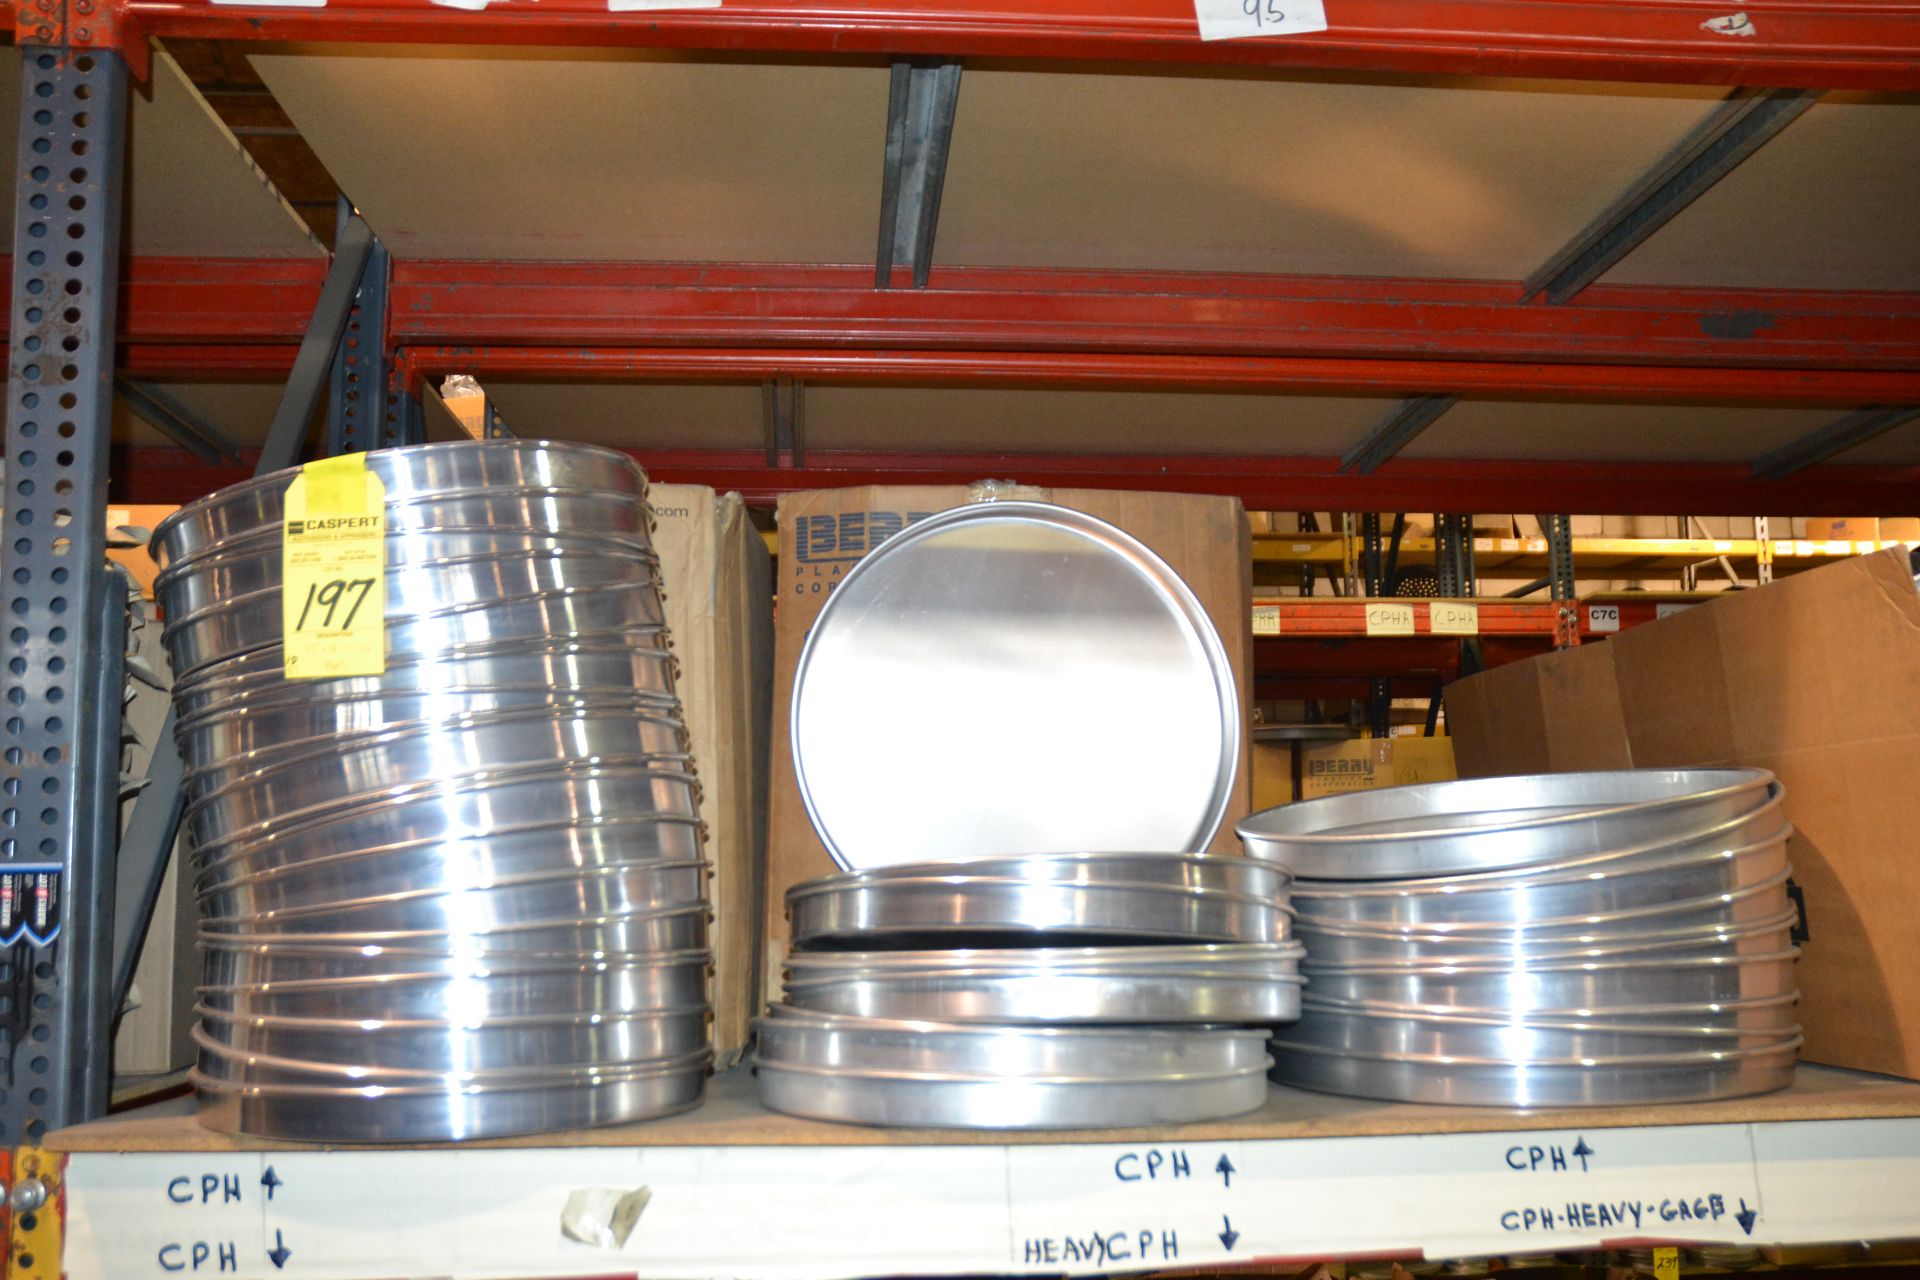 17" & 18" x 1 1/2" Deep Tapered Pans